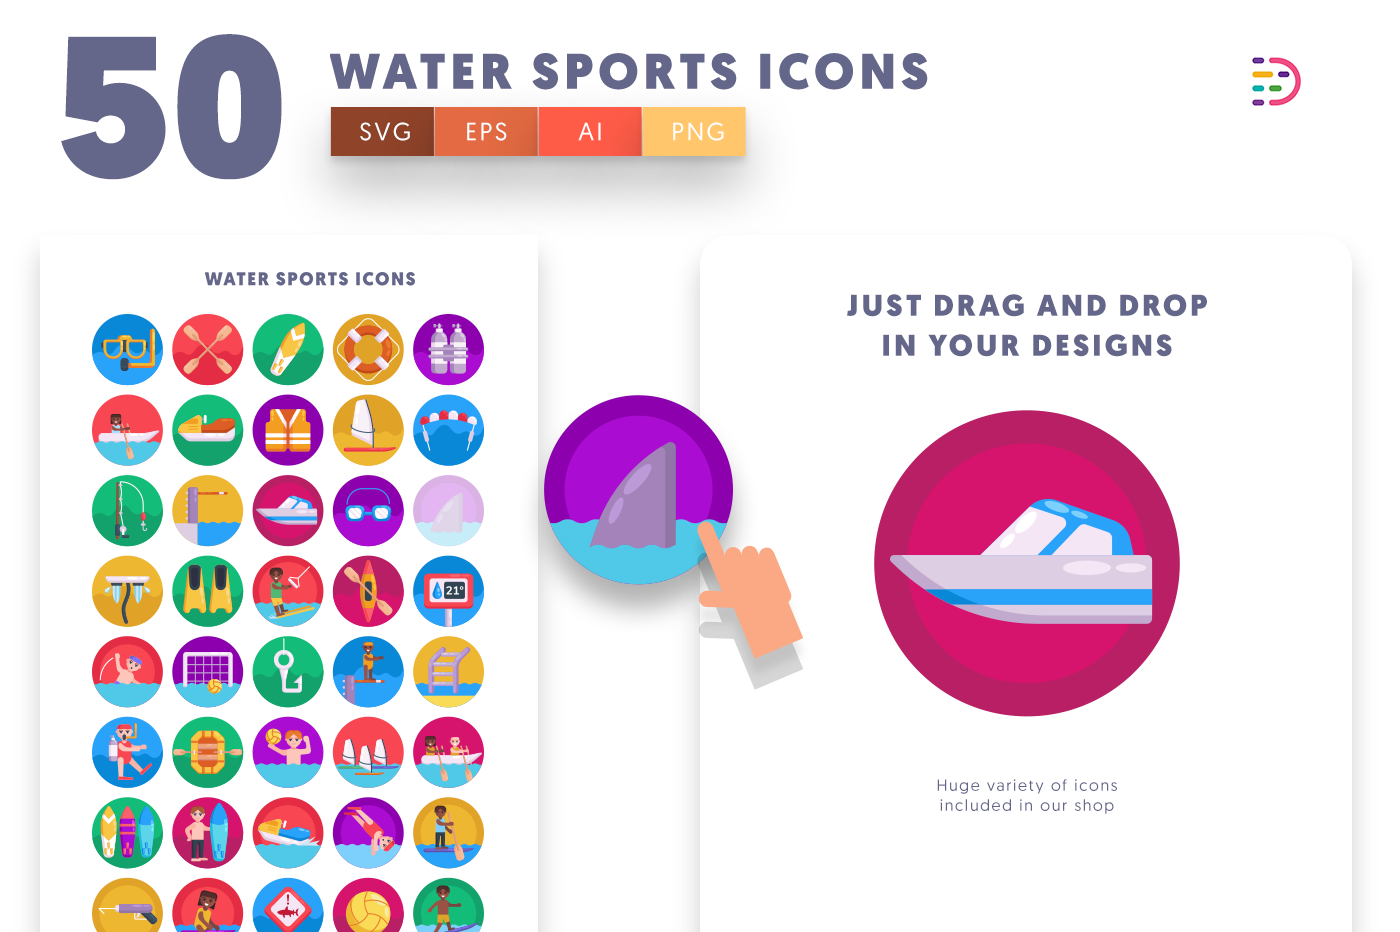 Drag and drop vector 50 Water Sports Icons 